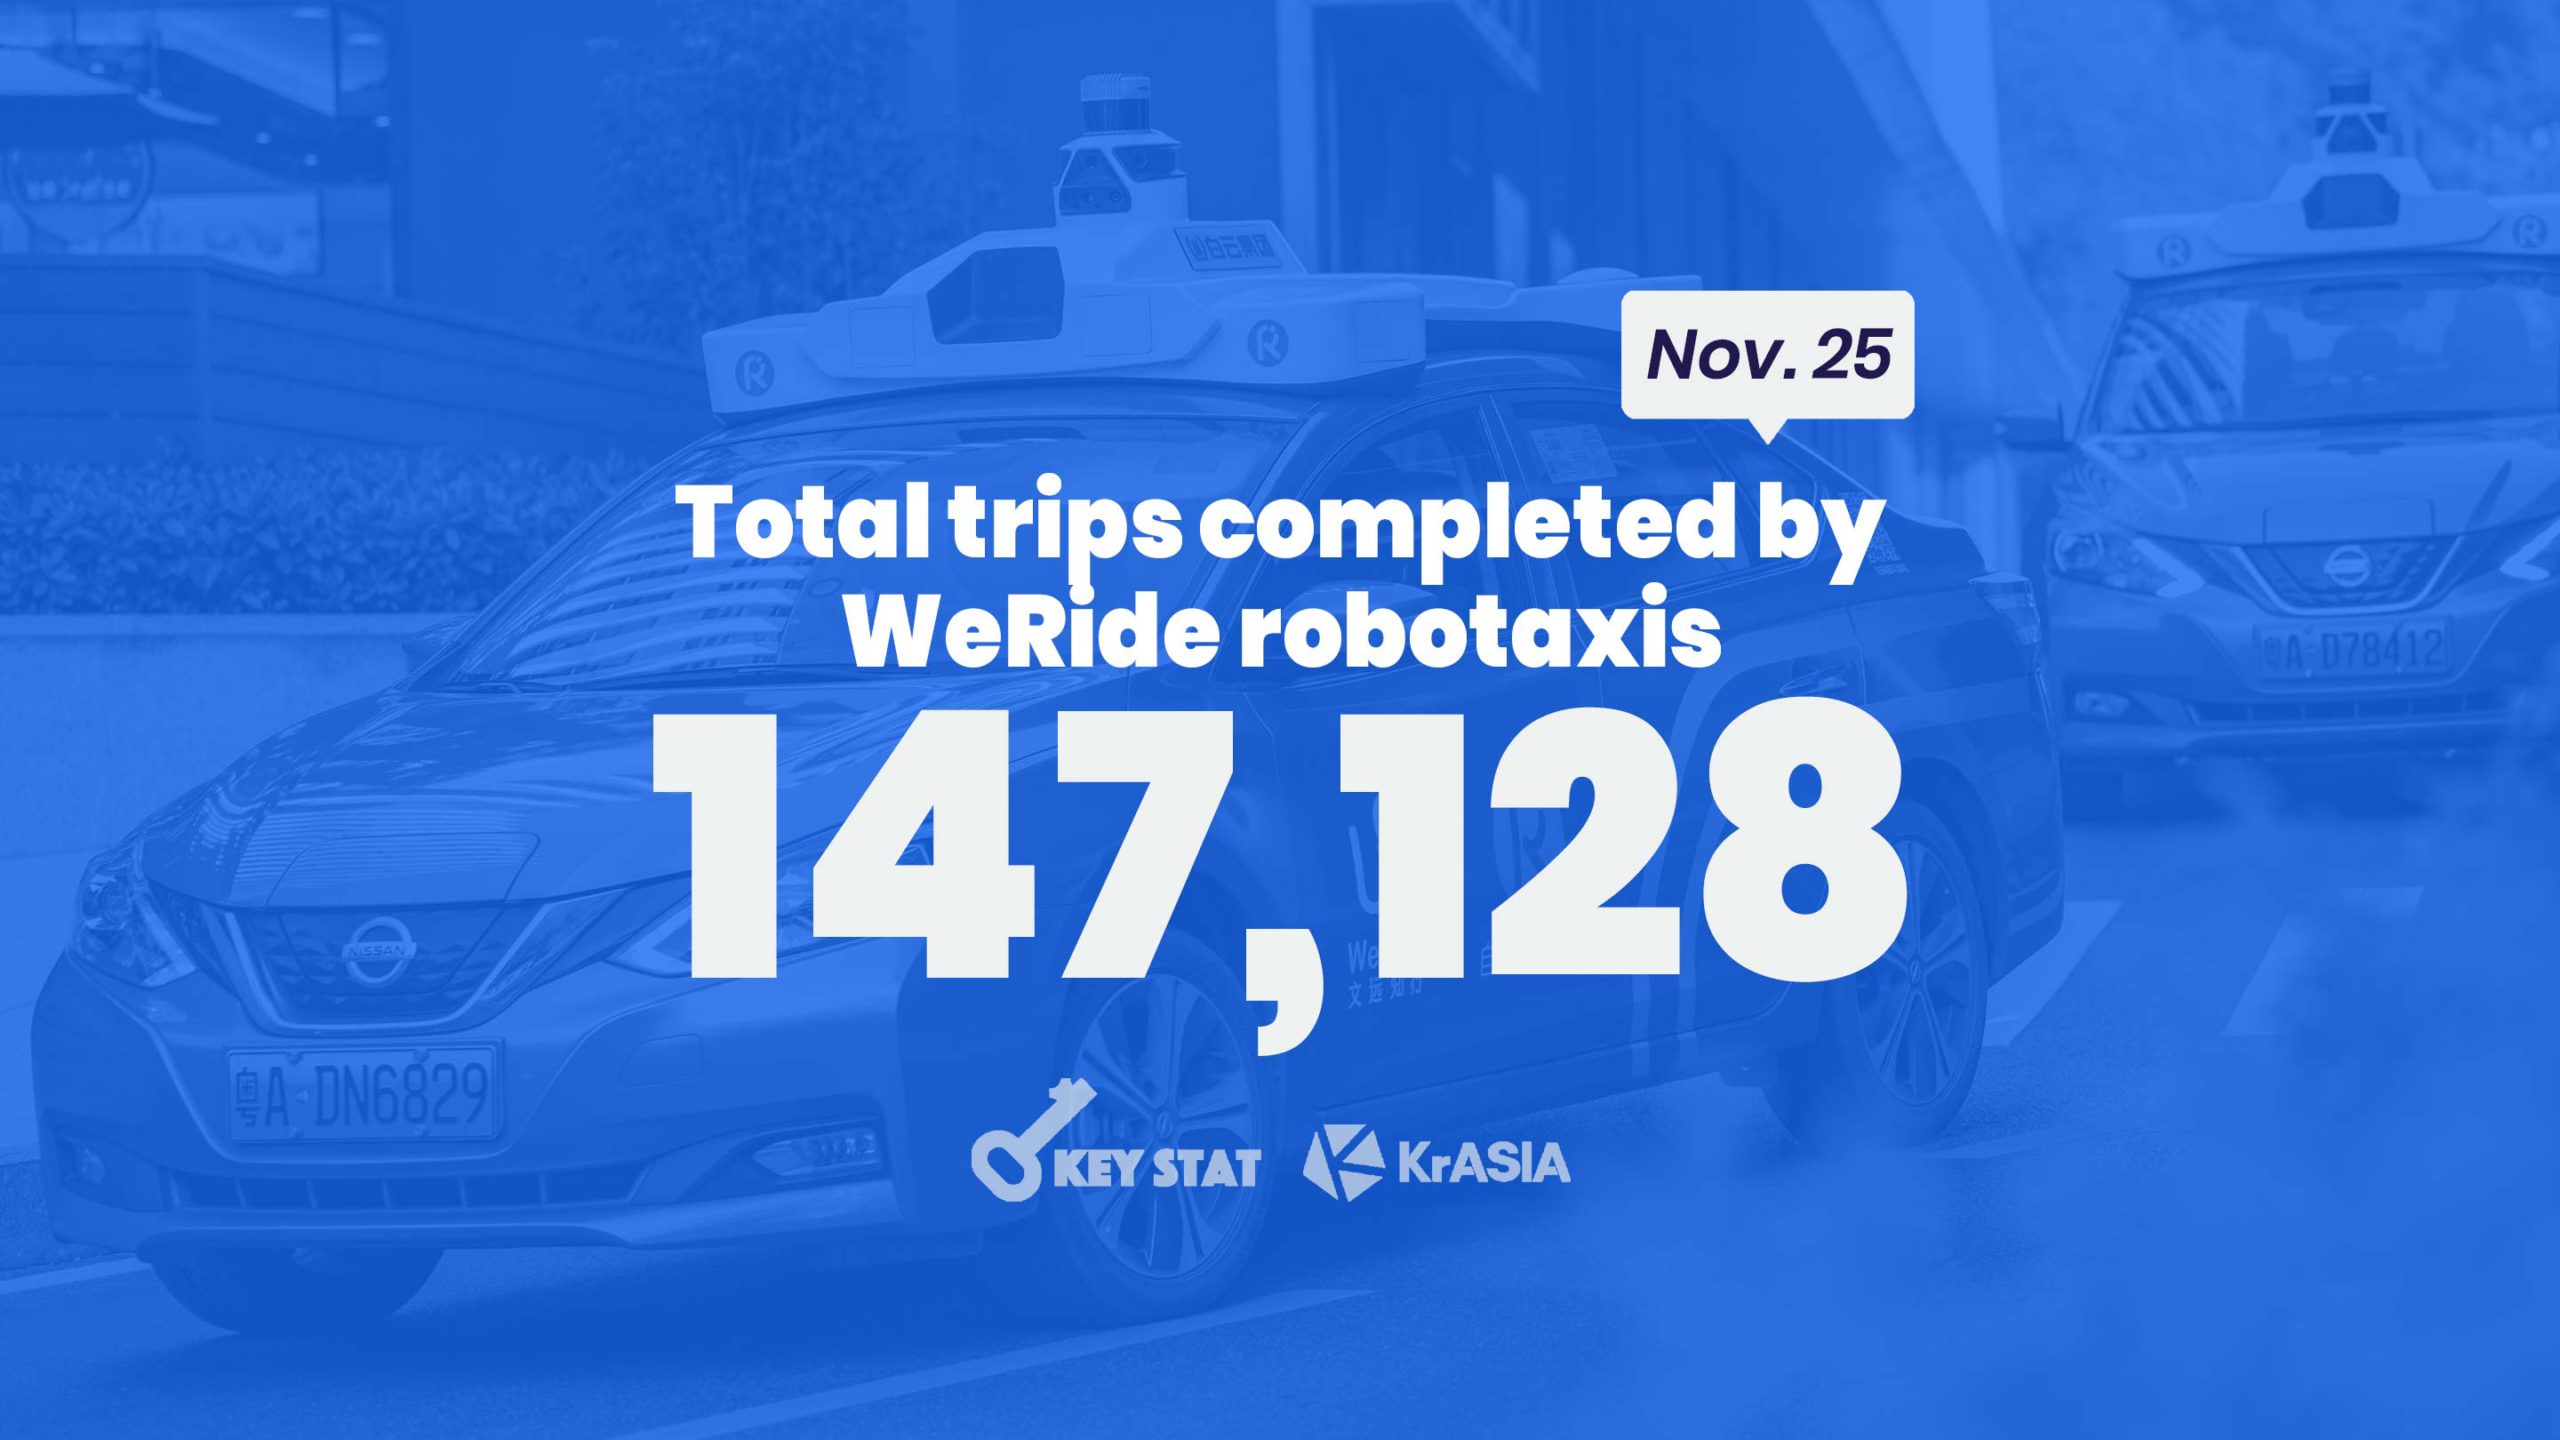 KEY STAT | Robotaxi operator WeRide reports successful first year of service